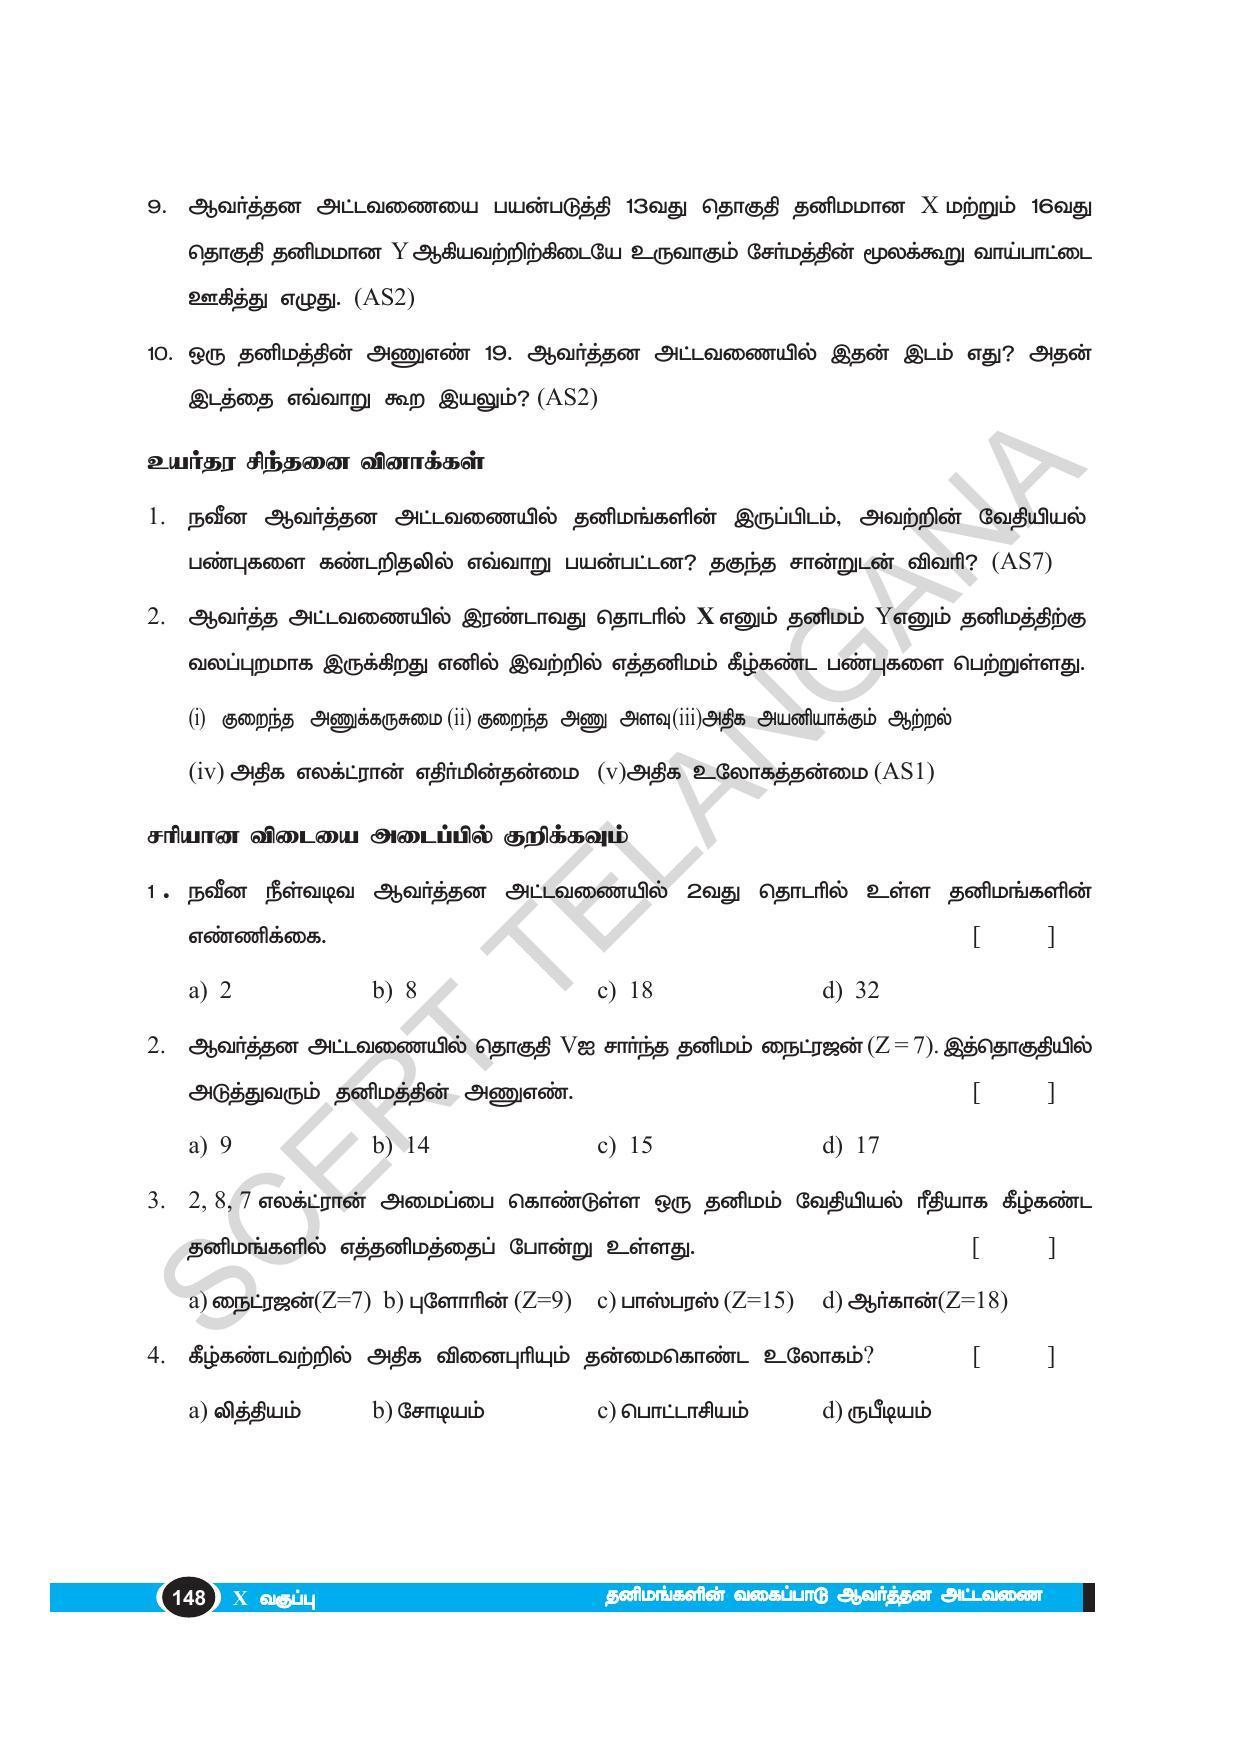 TS SCERT Class 10 Physical Science(Tamil Medium) Text Book - Page 160